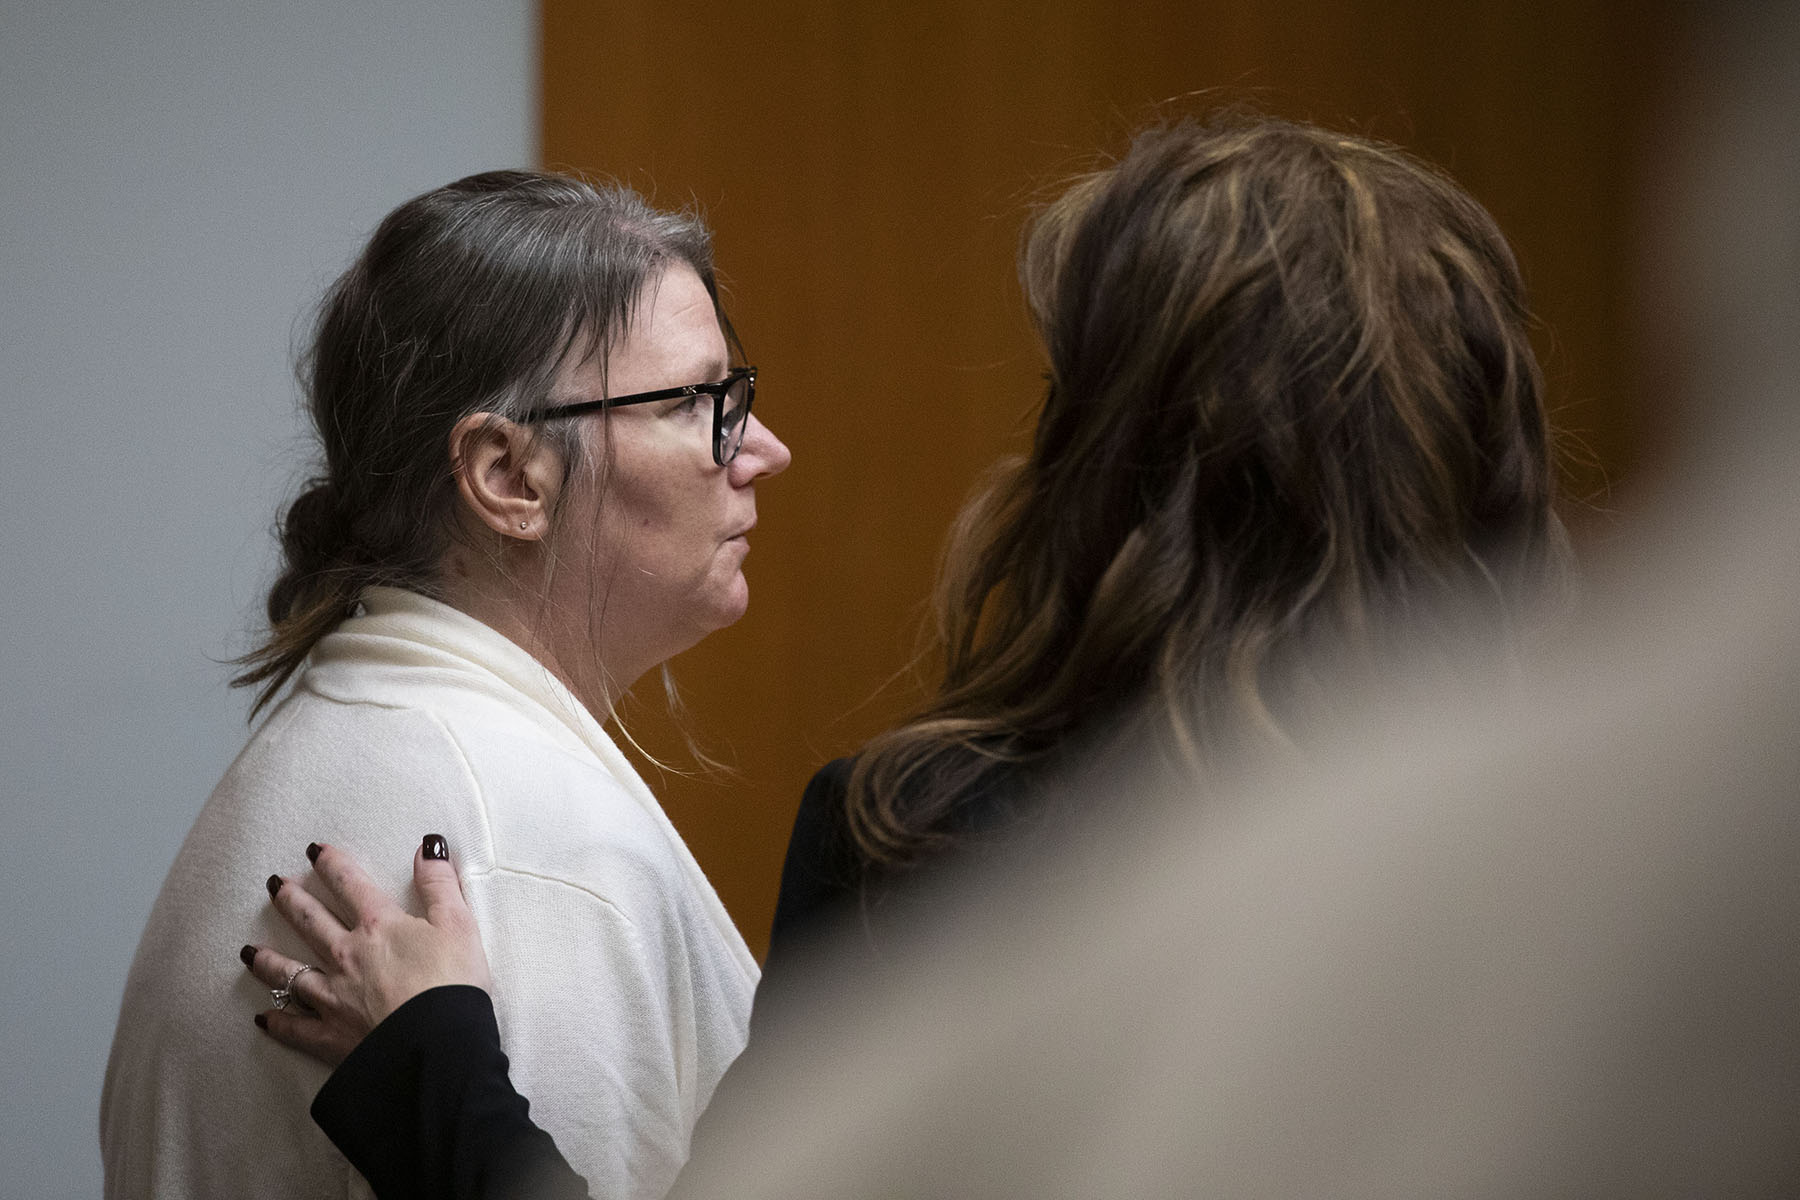 Jennifer Crumbley's attorney places her hand on Crumbley's shoulder to comfort her in Oakland County Circuit Court.